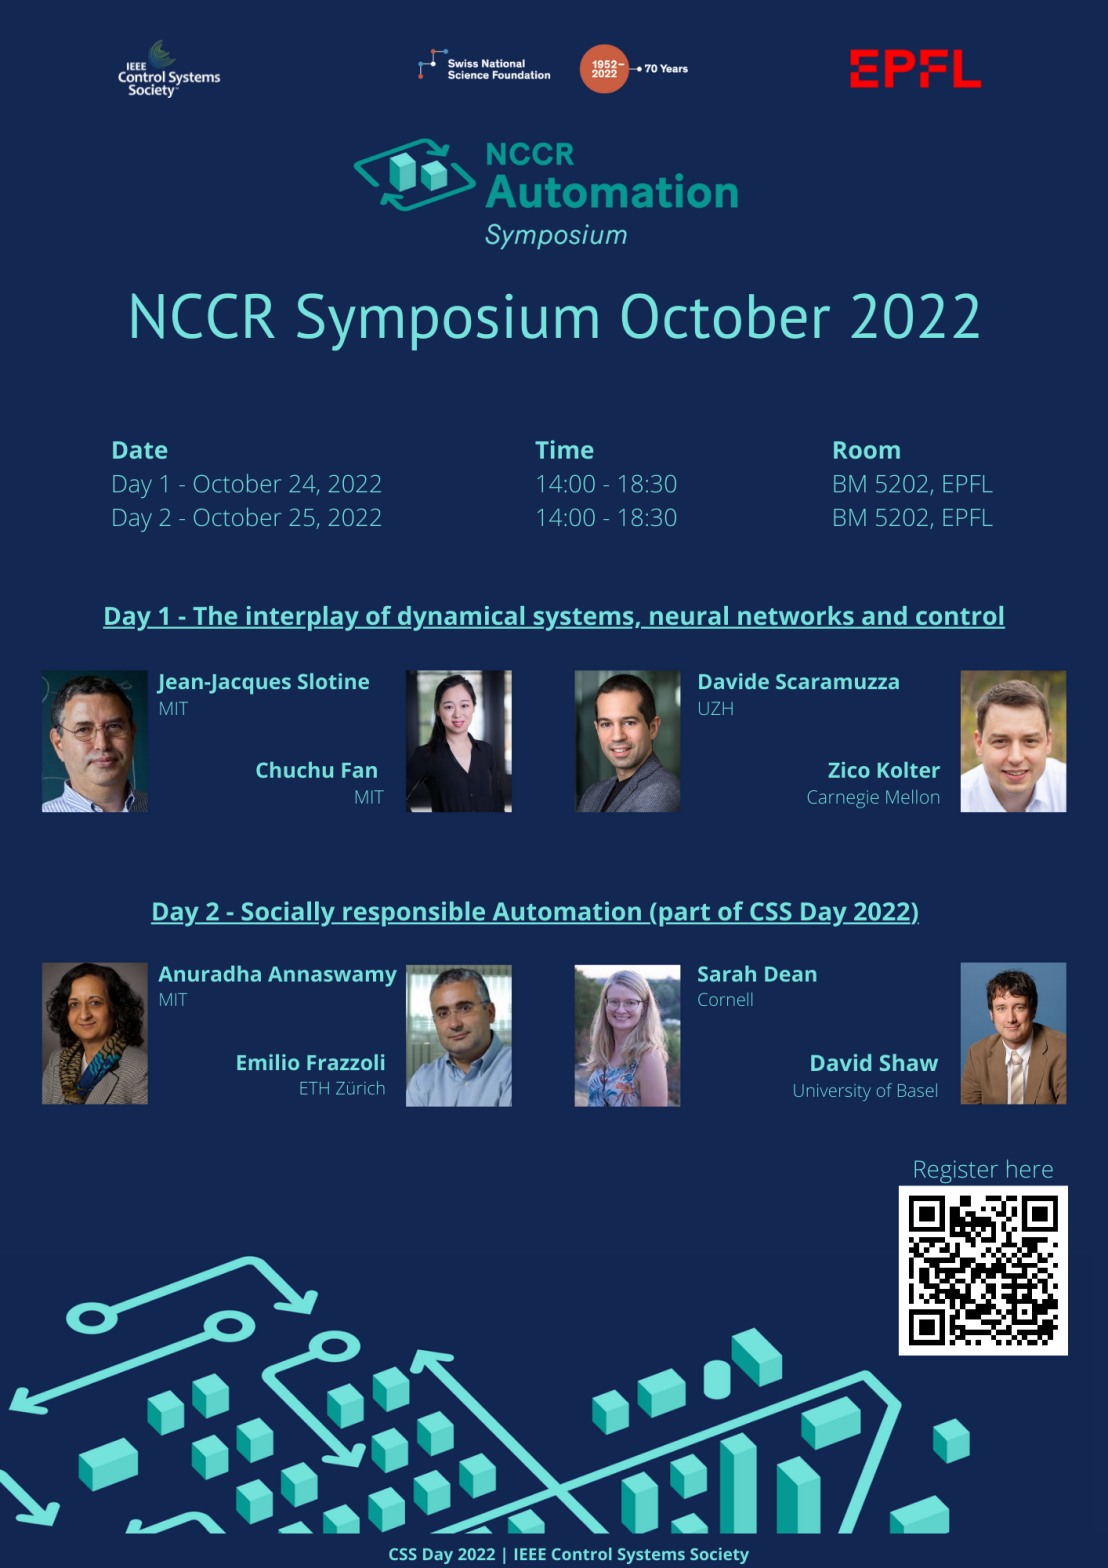 Enlarged view: NCCR Symposium at EPFL